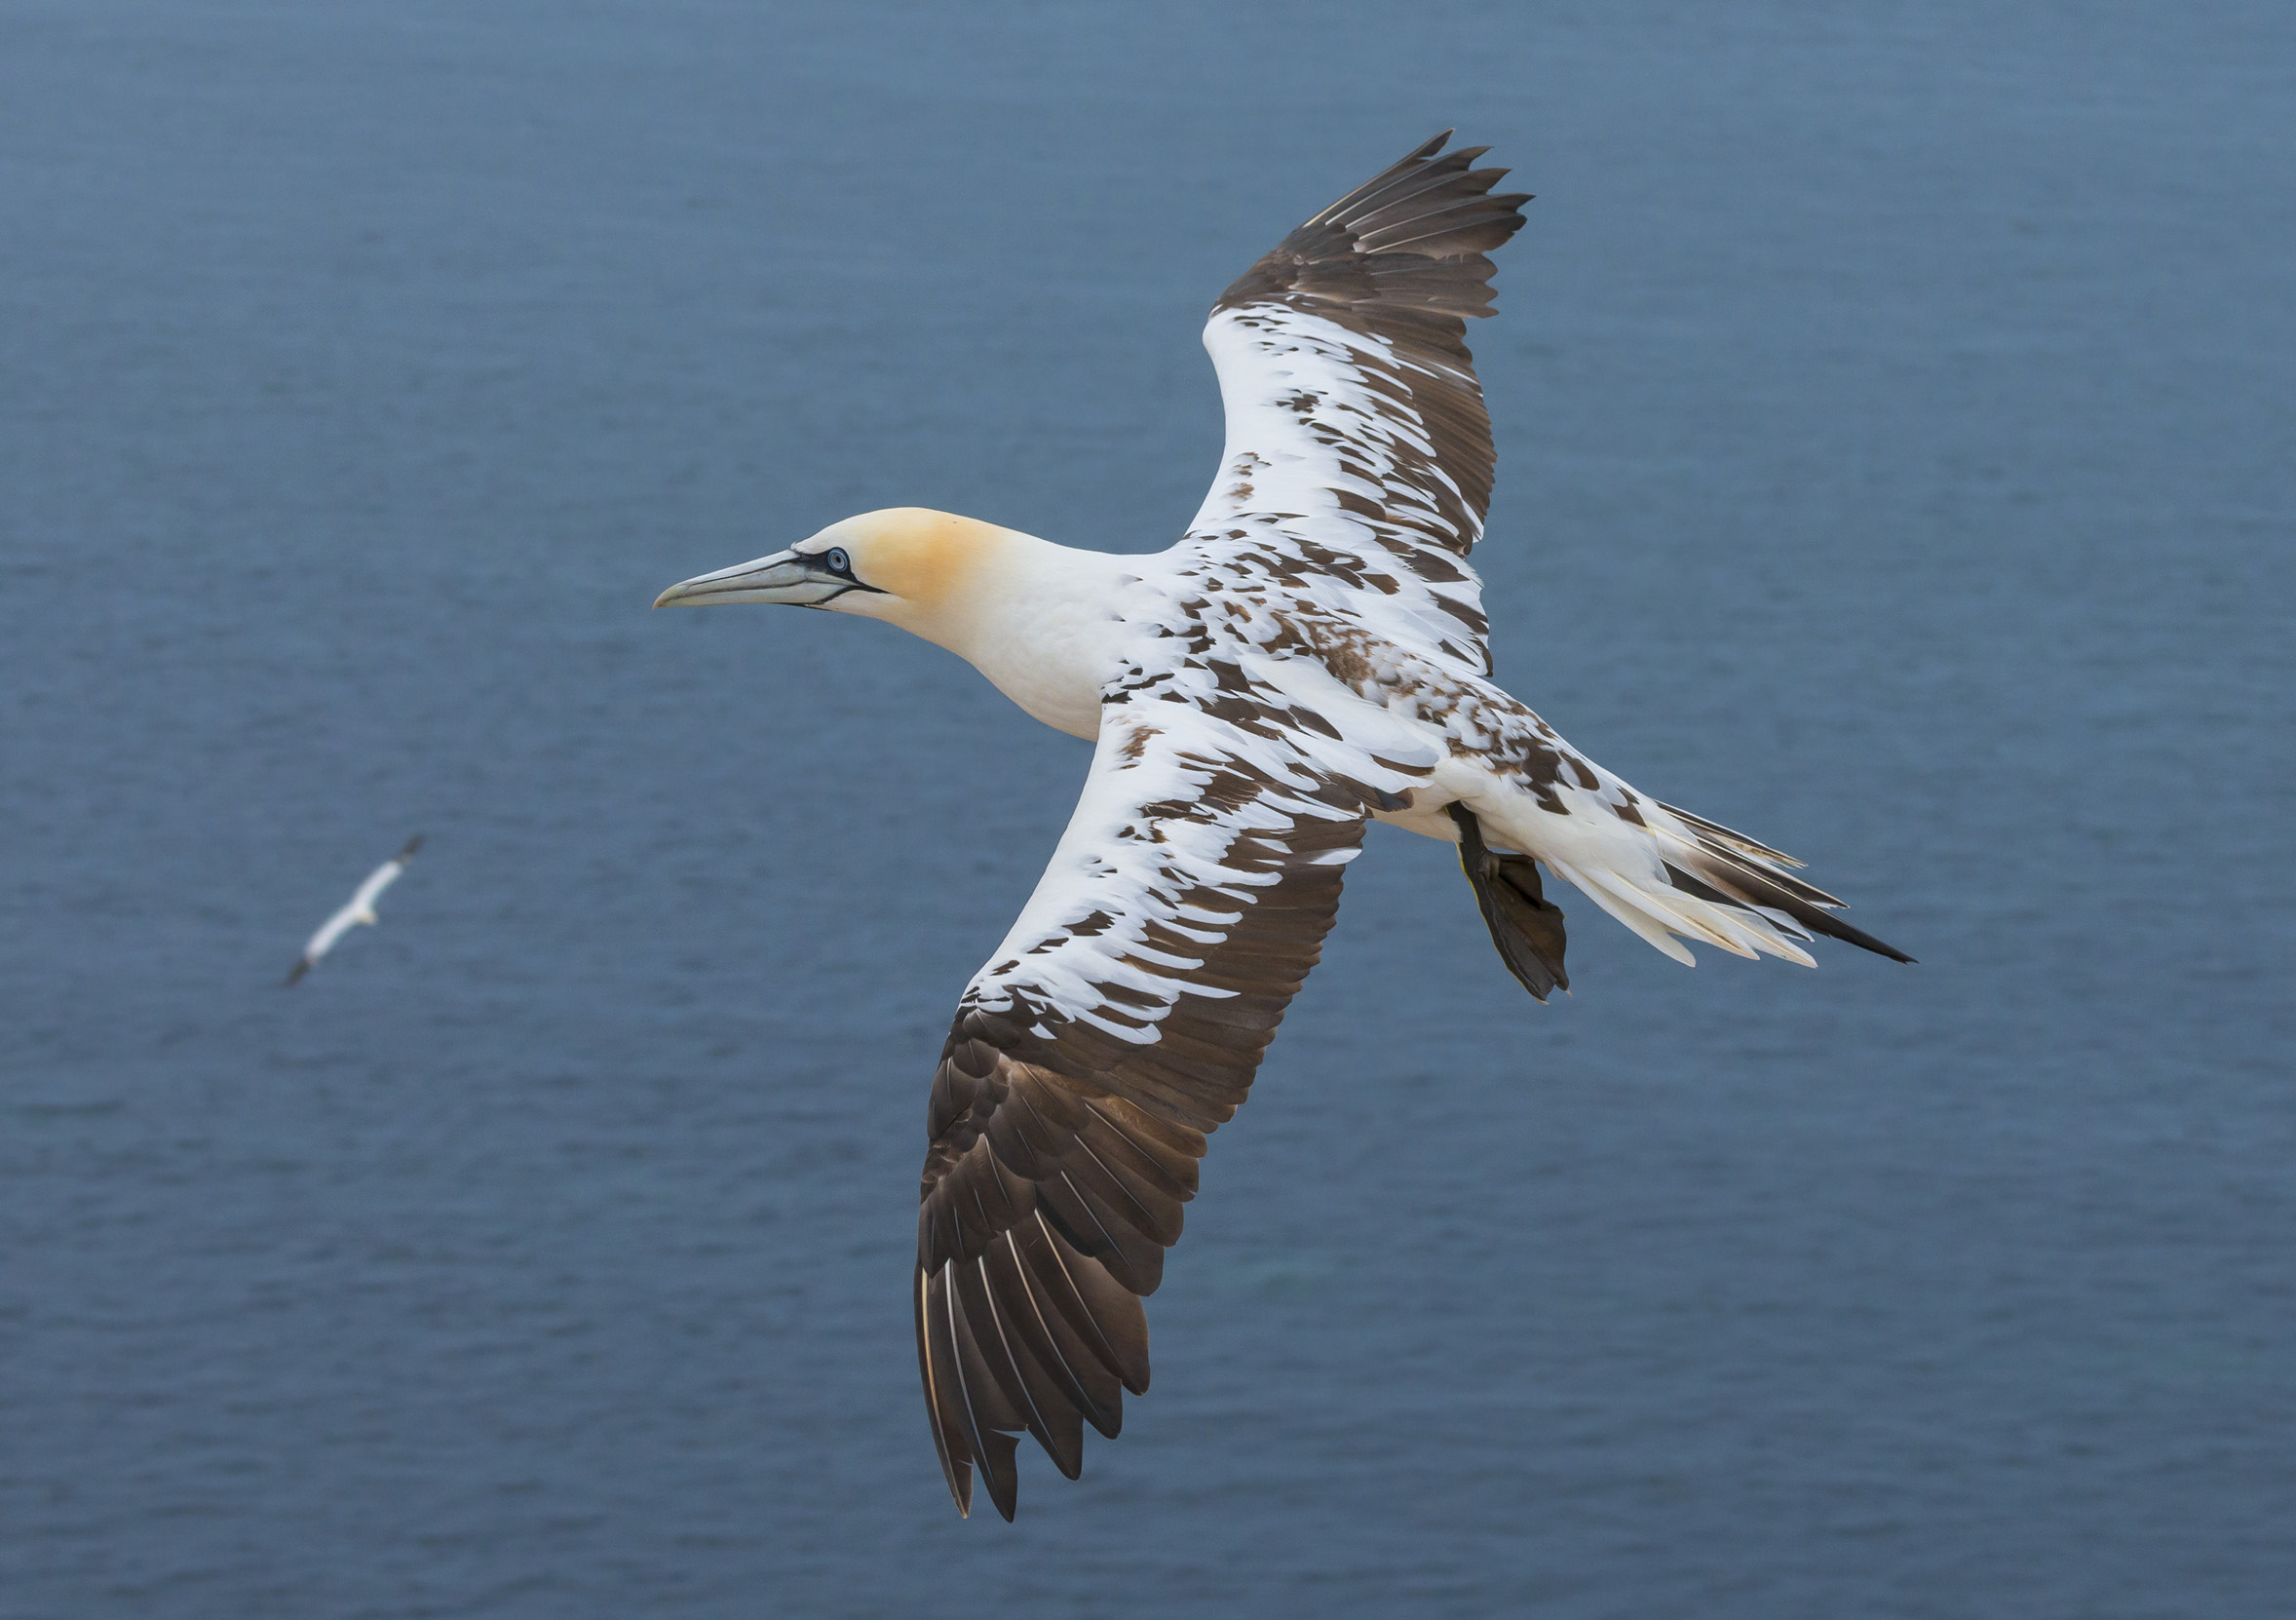 A lone Gannet flying over the sea.